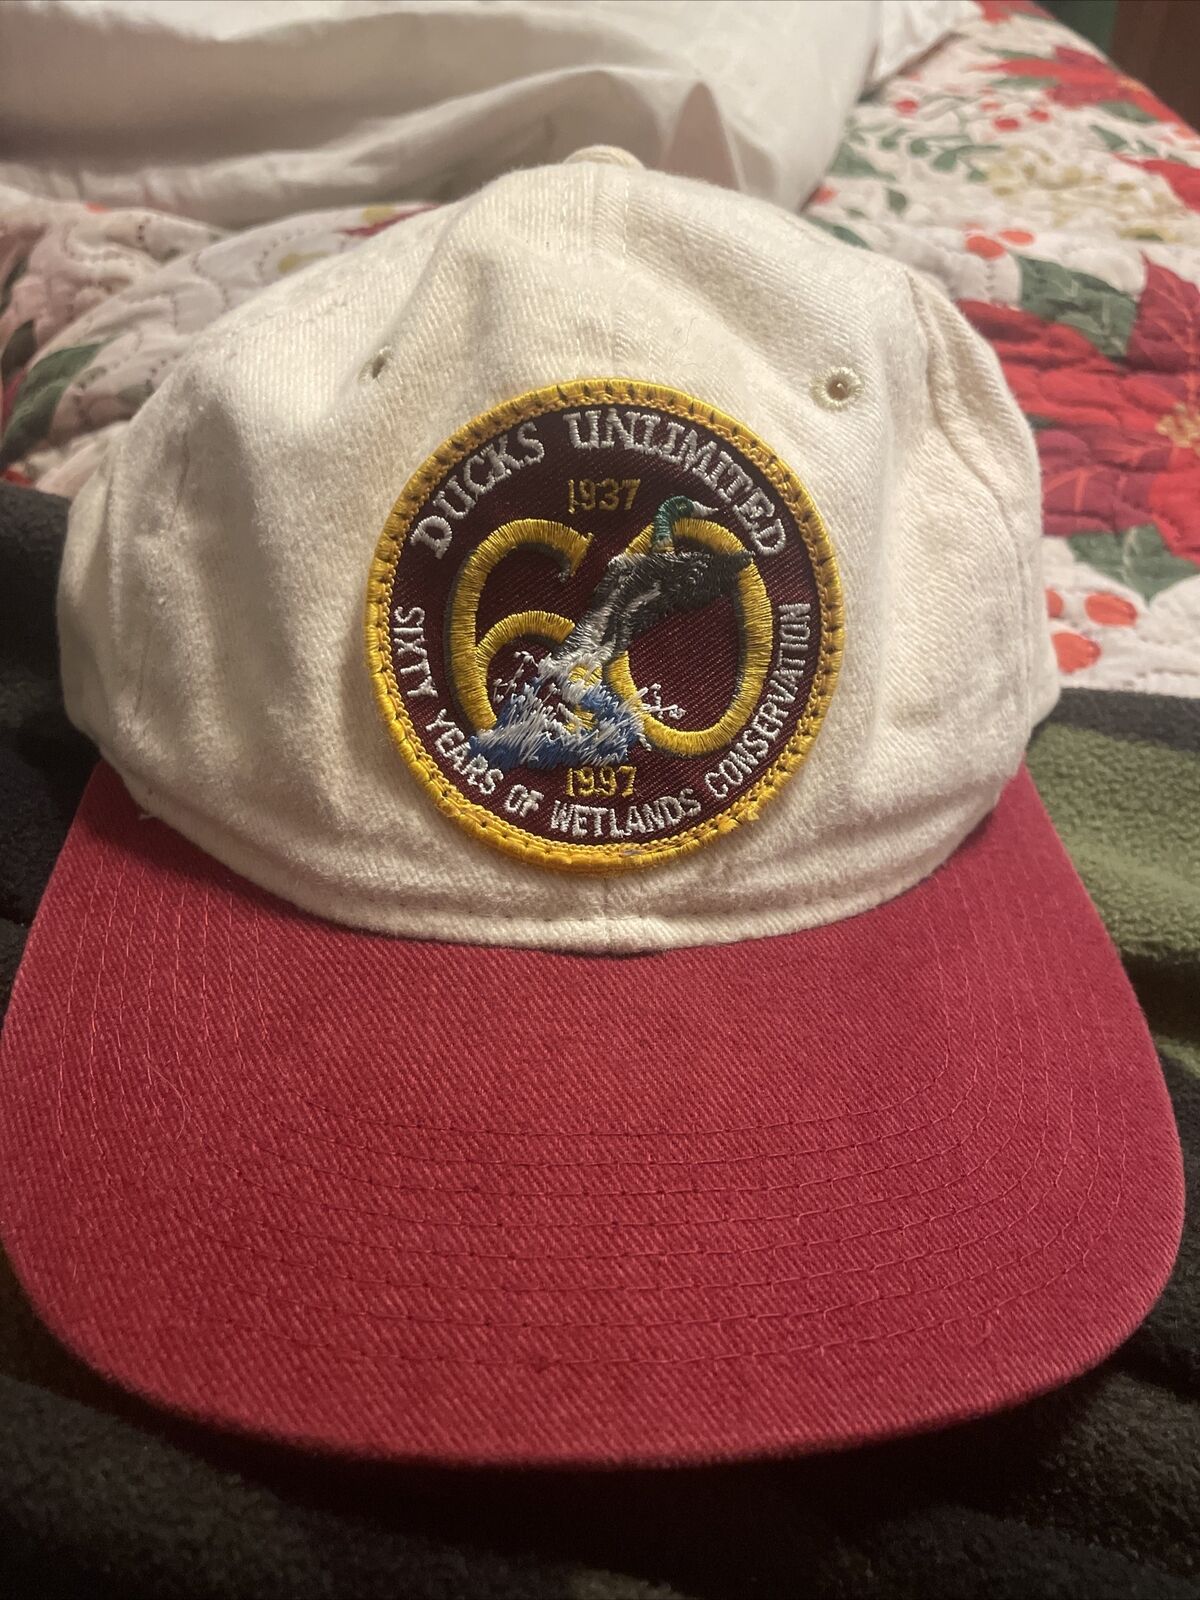 ducks unlimited 60 years Of Wetlands Conservation Hat